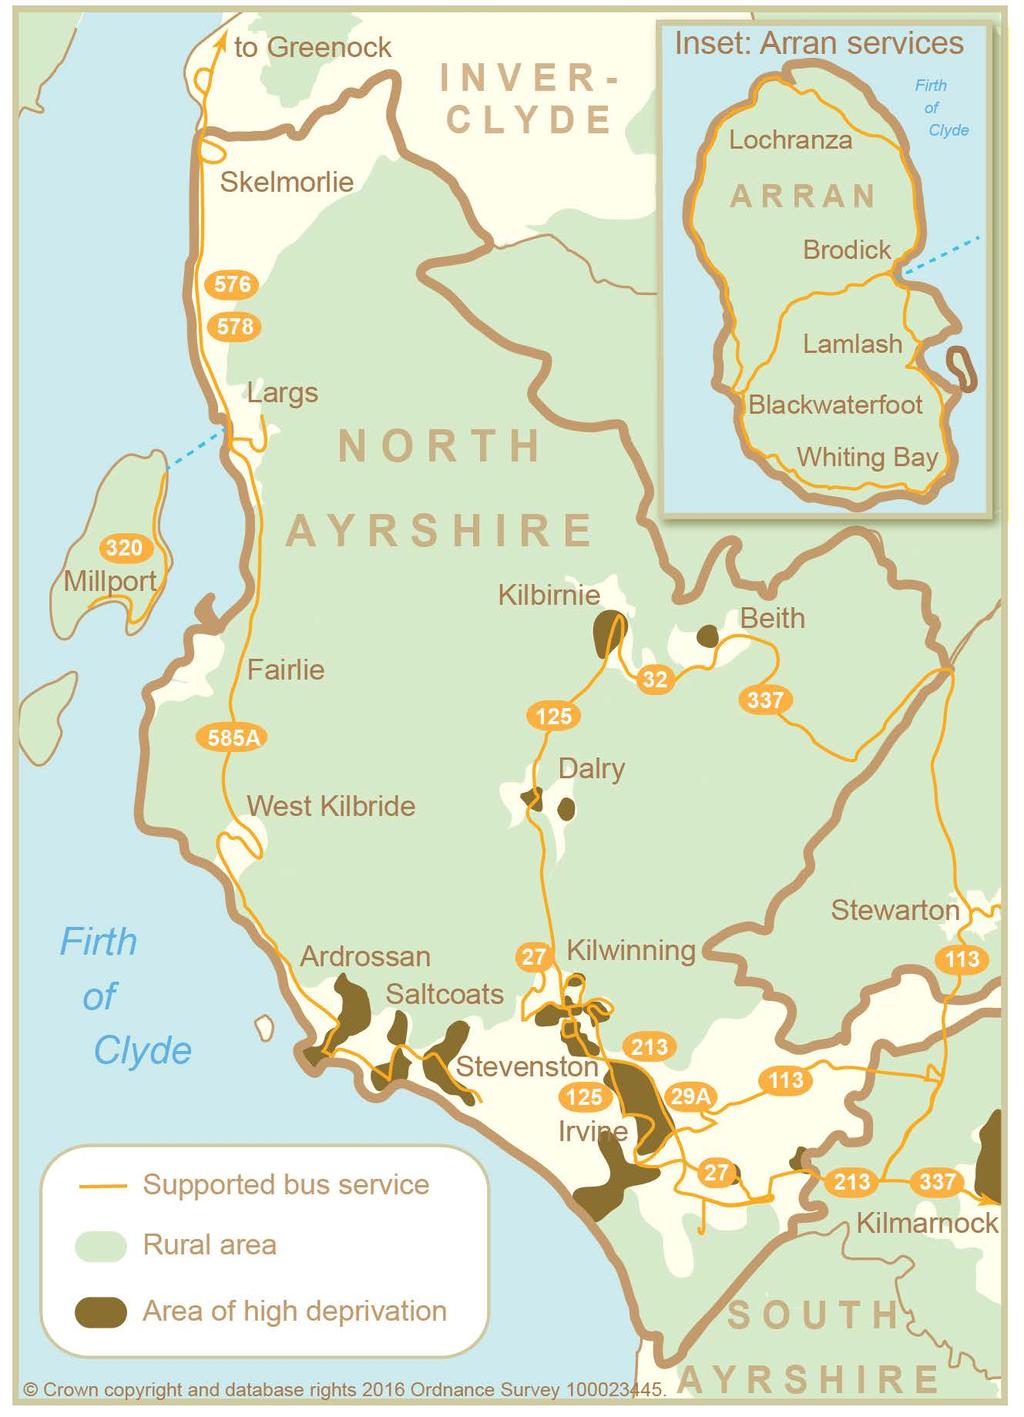 NORTH AYRSHIRE TRANSPORT OUTCOMES REPORT 2016/17 8.